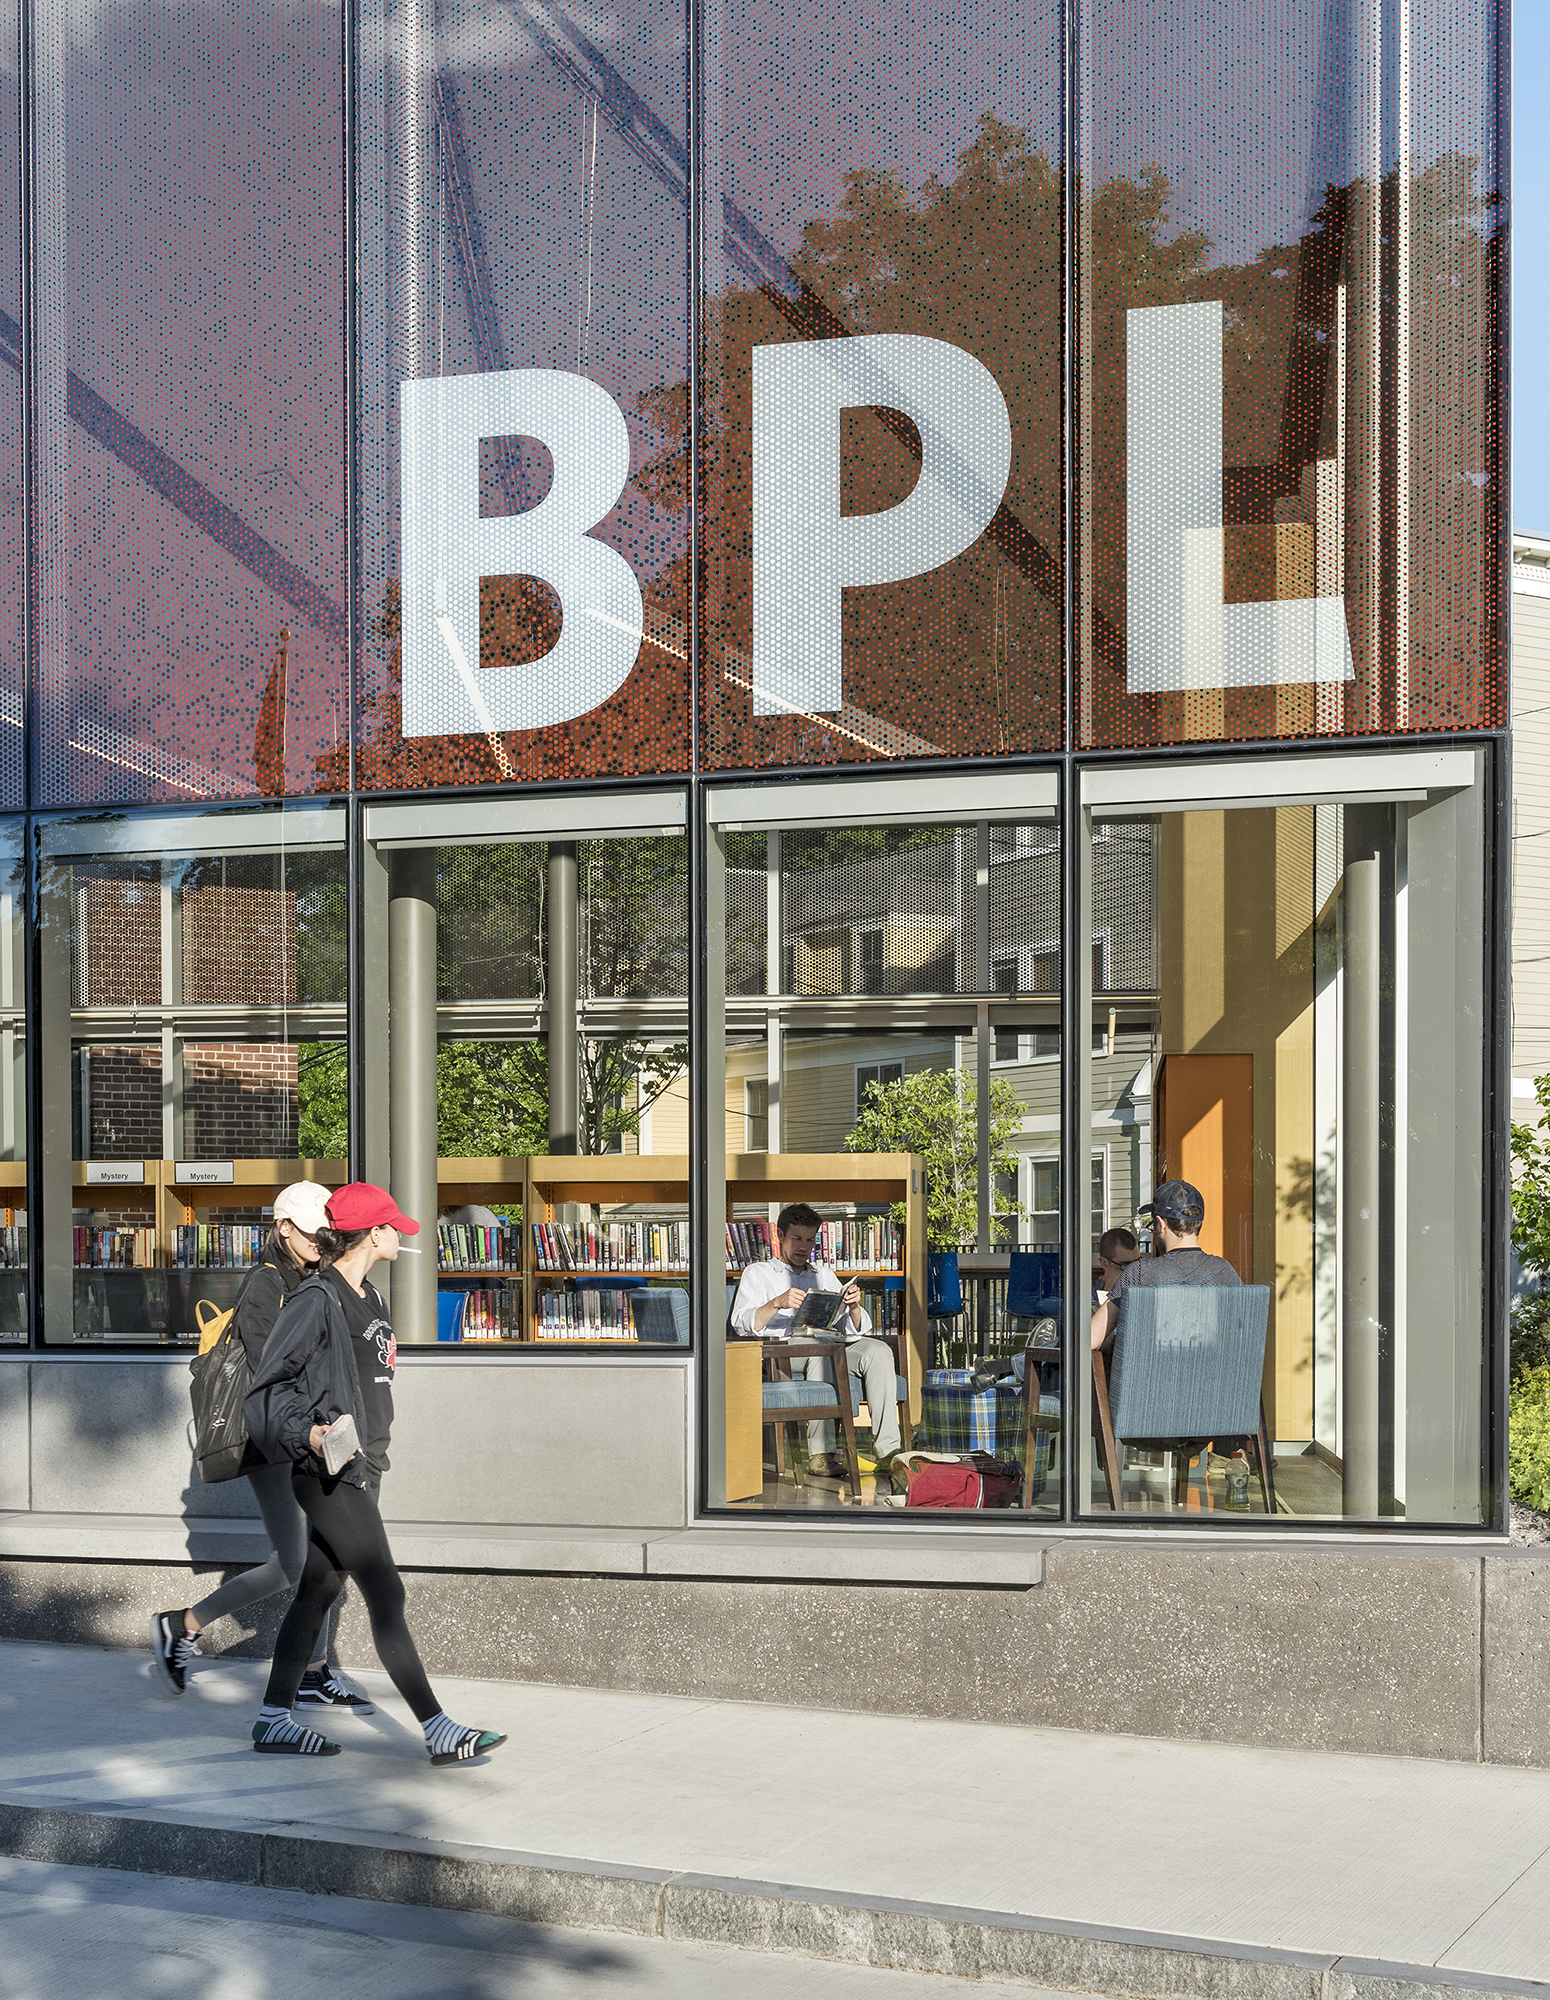 New photos of the Jamaica Plain Branch of the Boston Public Library